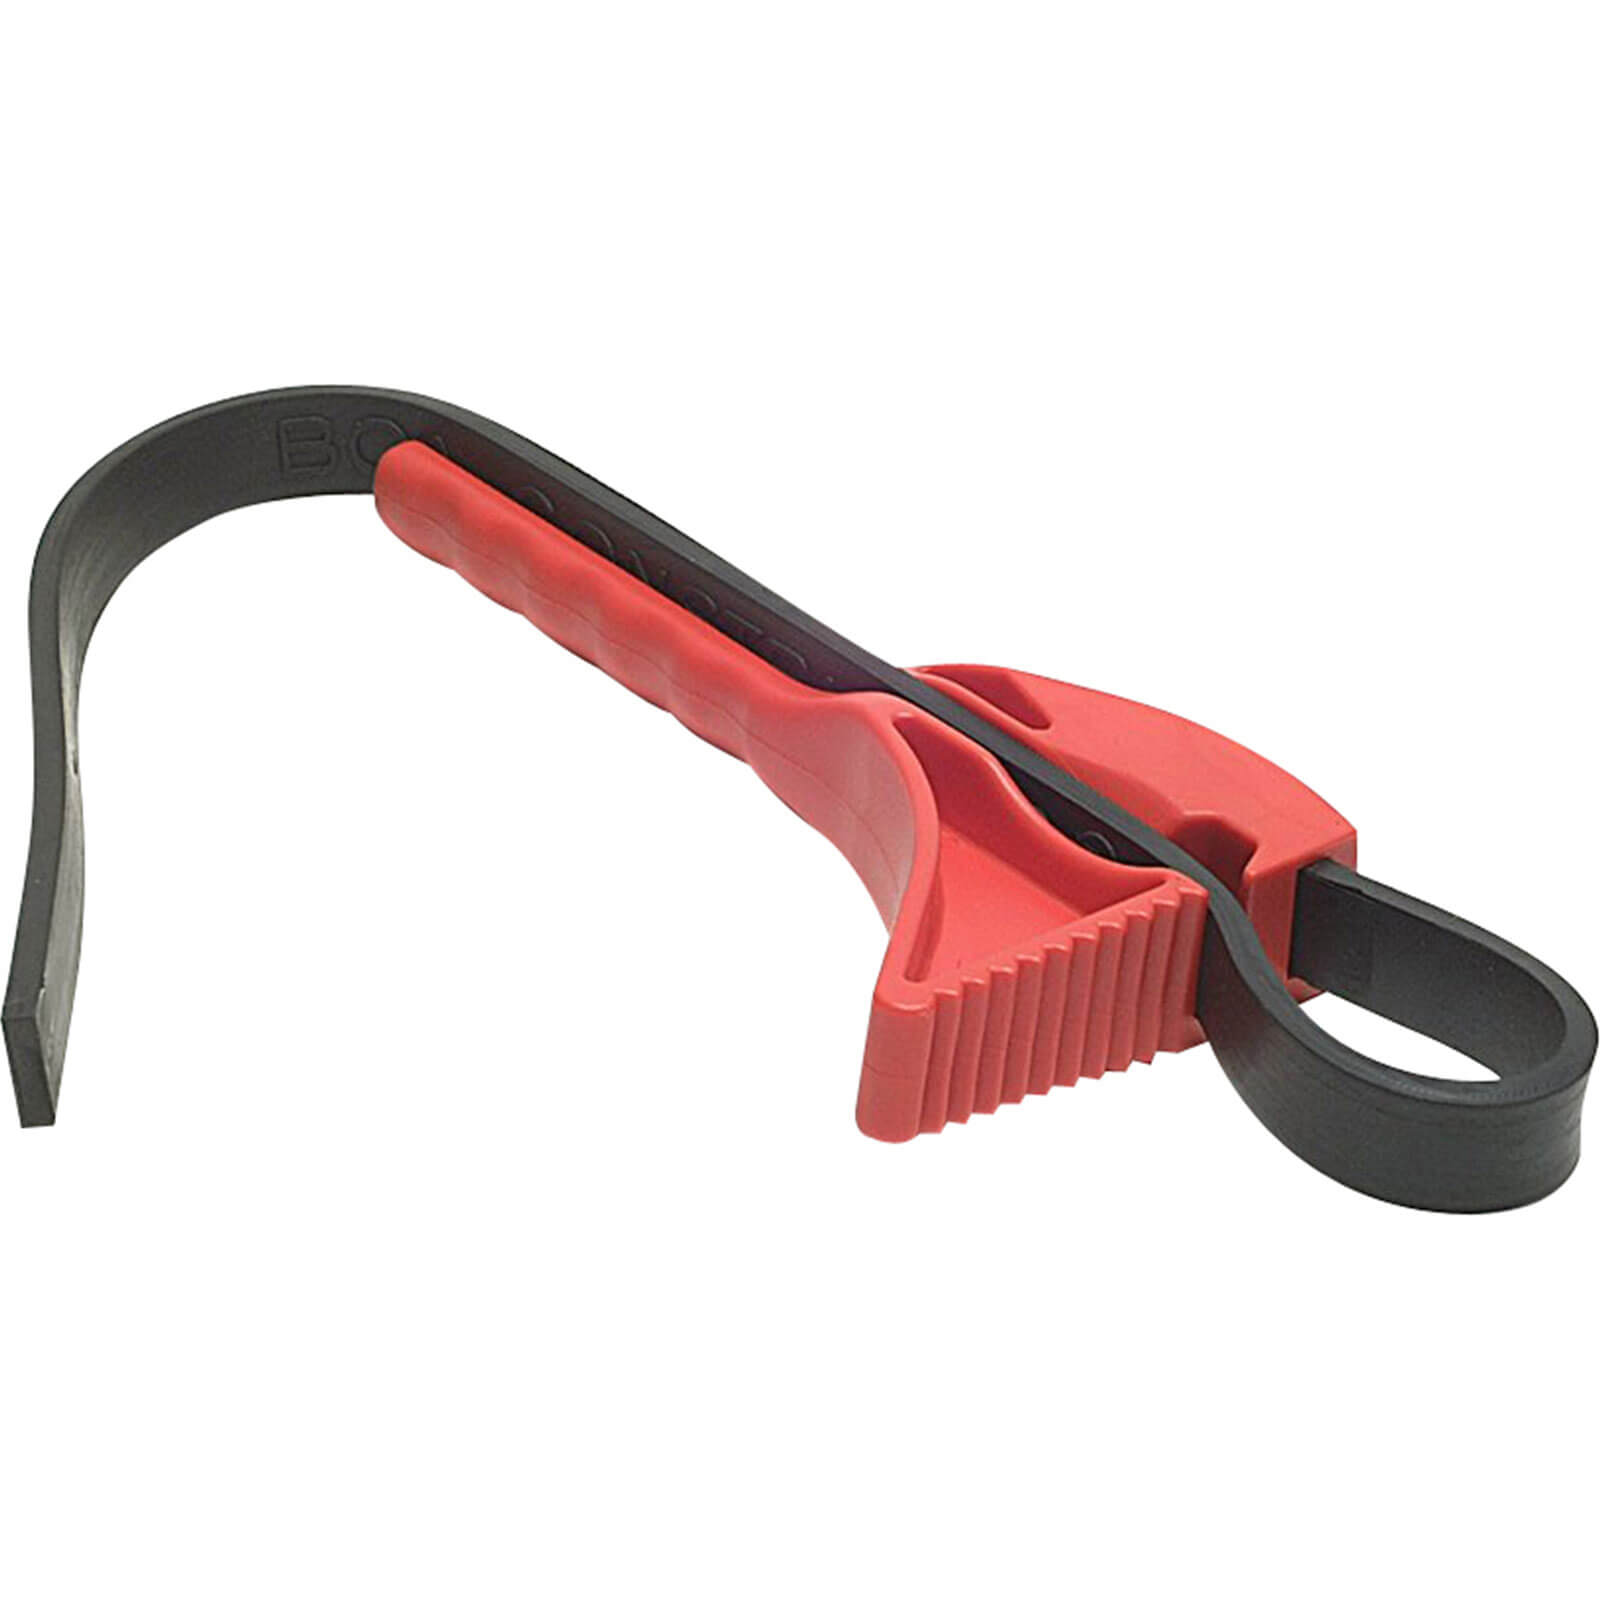 Image of Boa Constrictor Strap Wrench